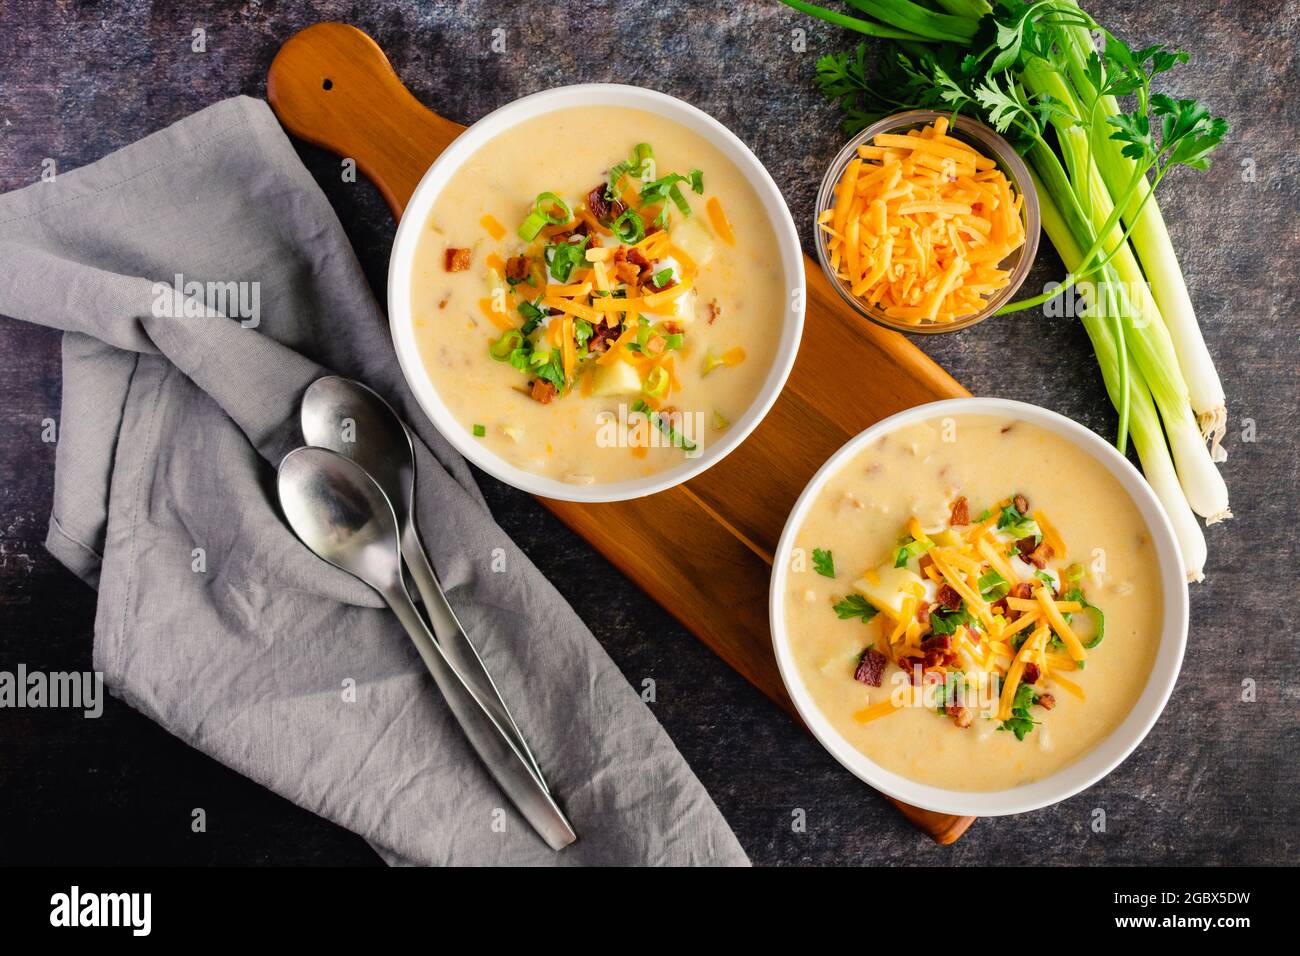 Bowls of Loaded Baked Potato Soup Topped with Sour Cream, Cheddar Cheese, Bacon, and Chives: Creamy potato soup garnished with sour cream, shredded ch Stock Photo